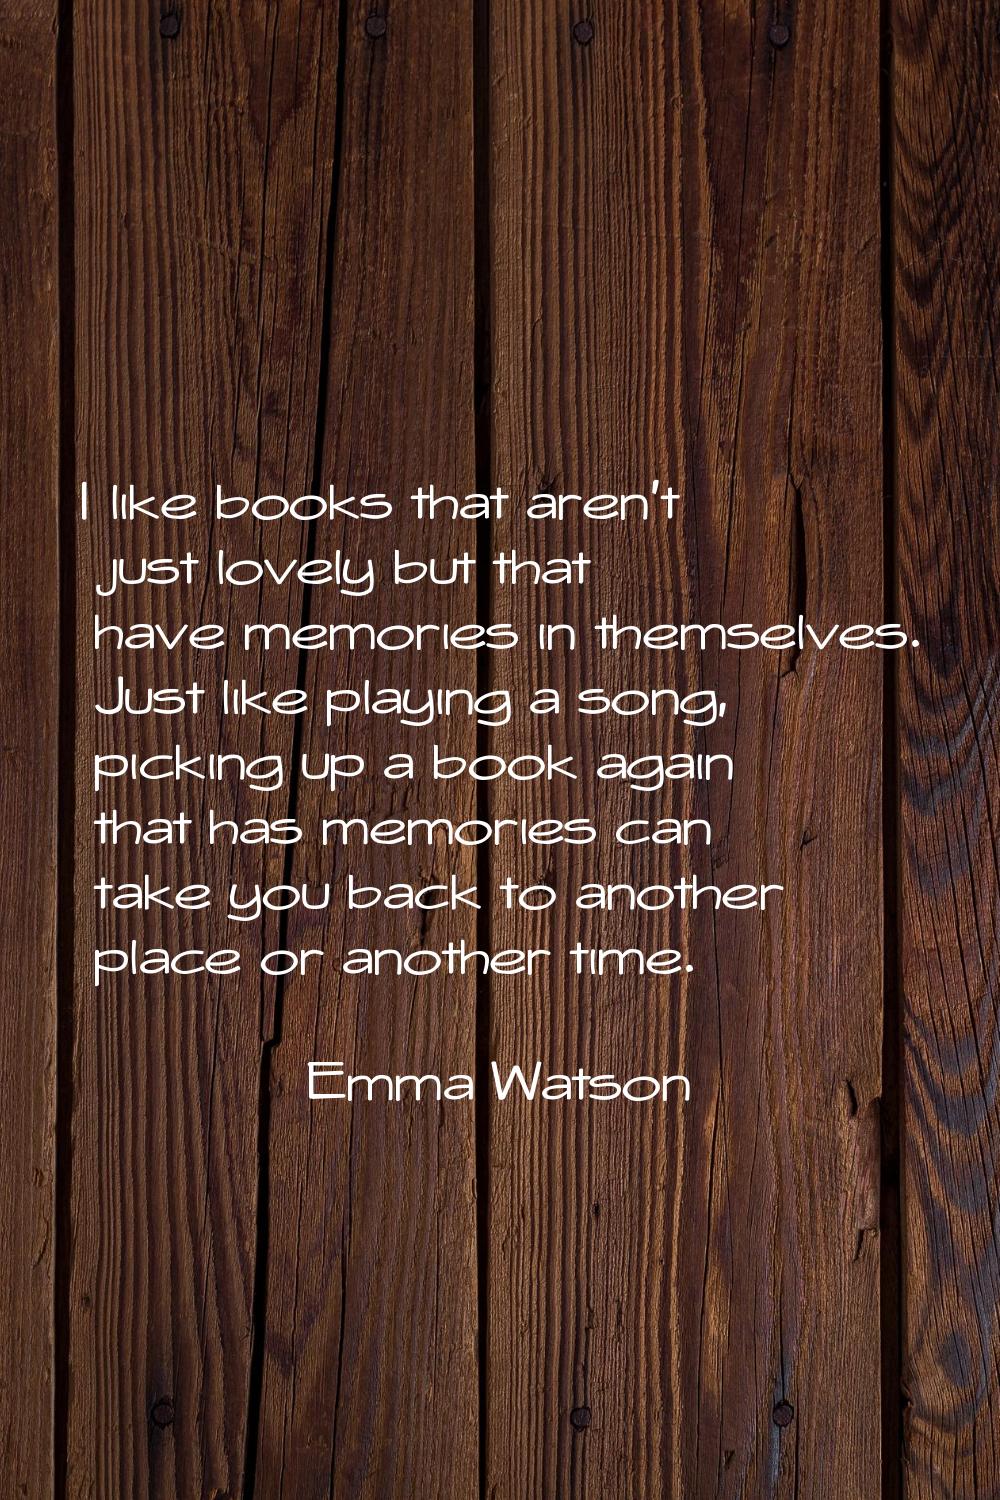 I like books that aren't just lovely but that have memories in themselves. Just like playing a song